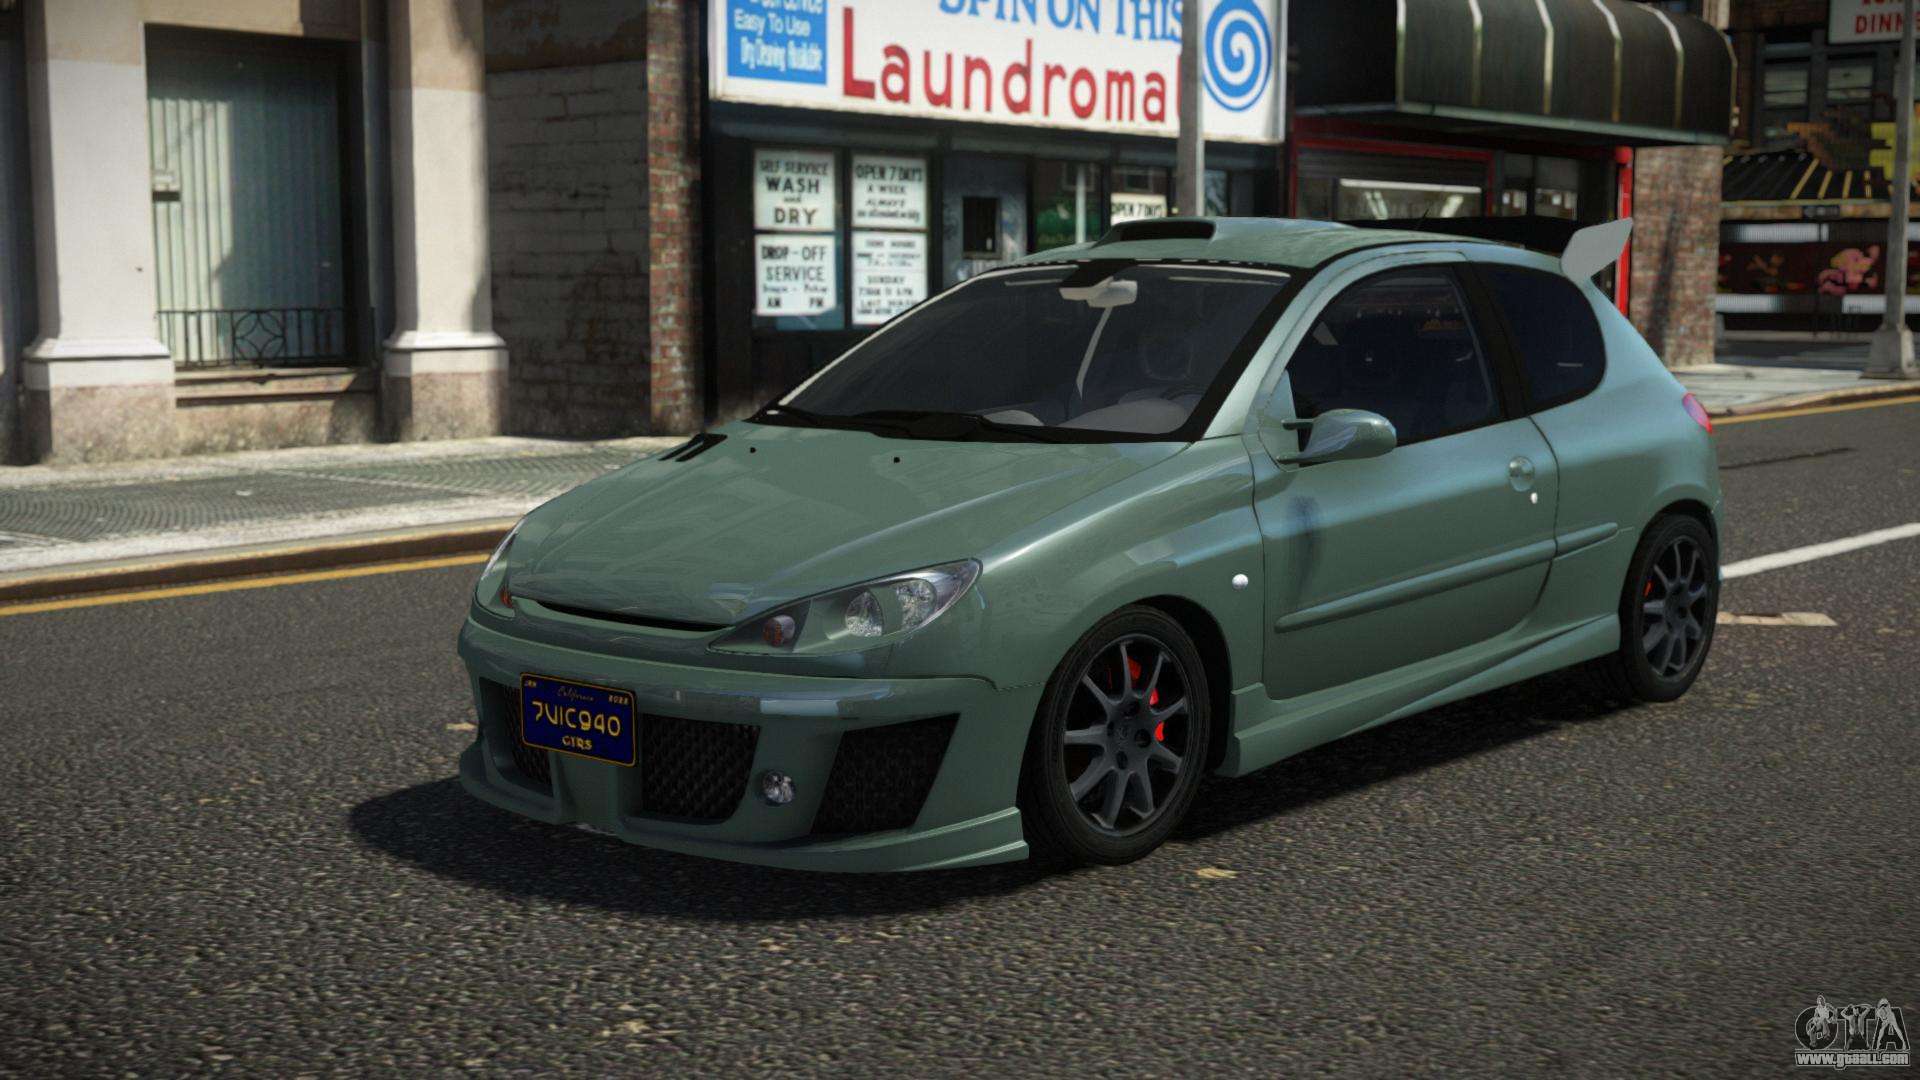 Peugeot 206 -Tuning- . Tuning from